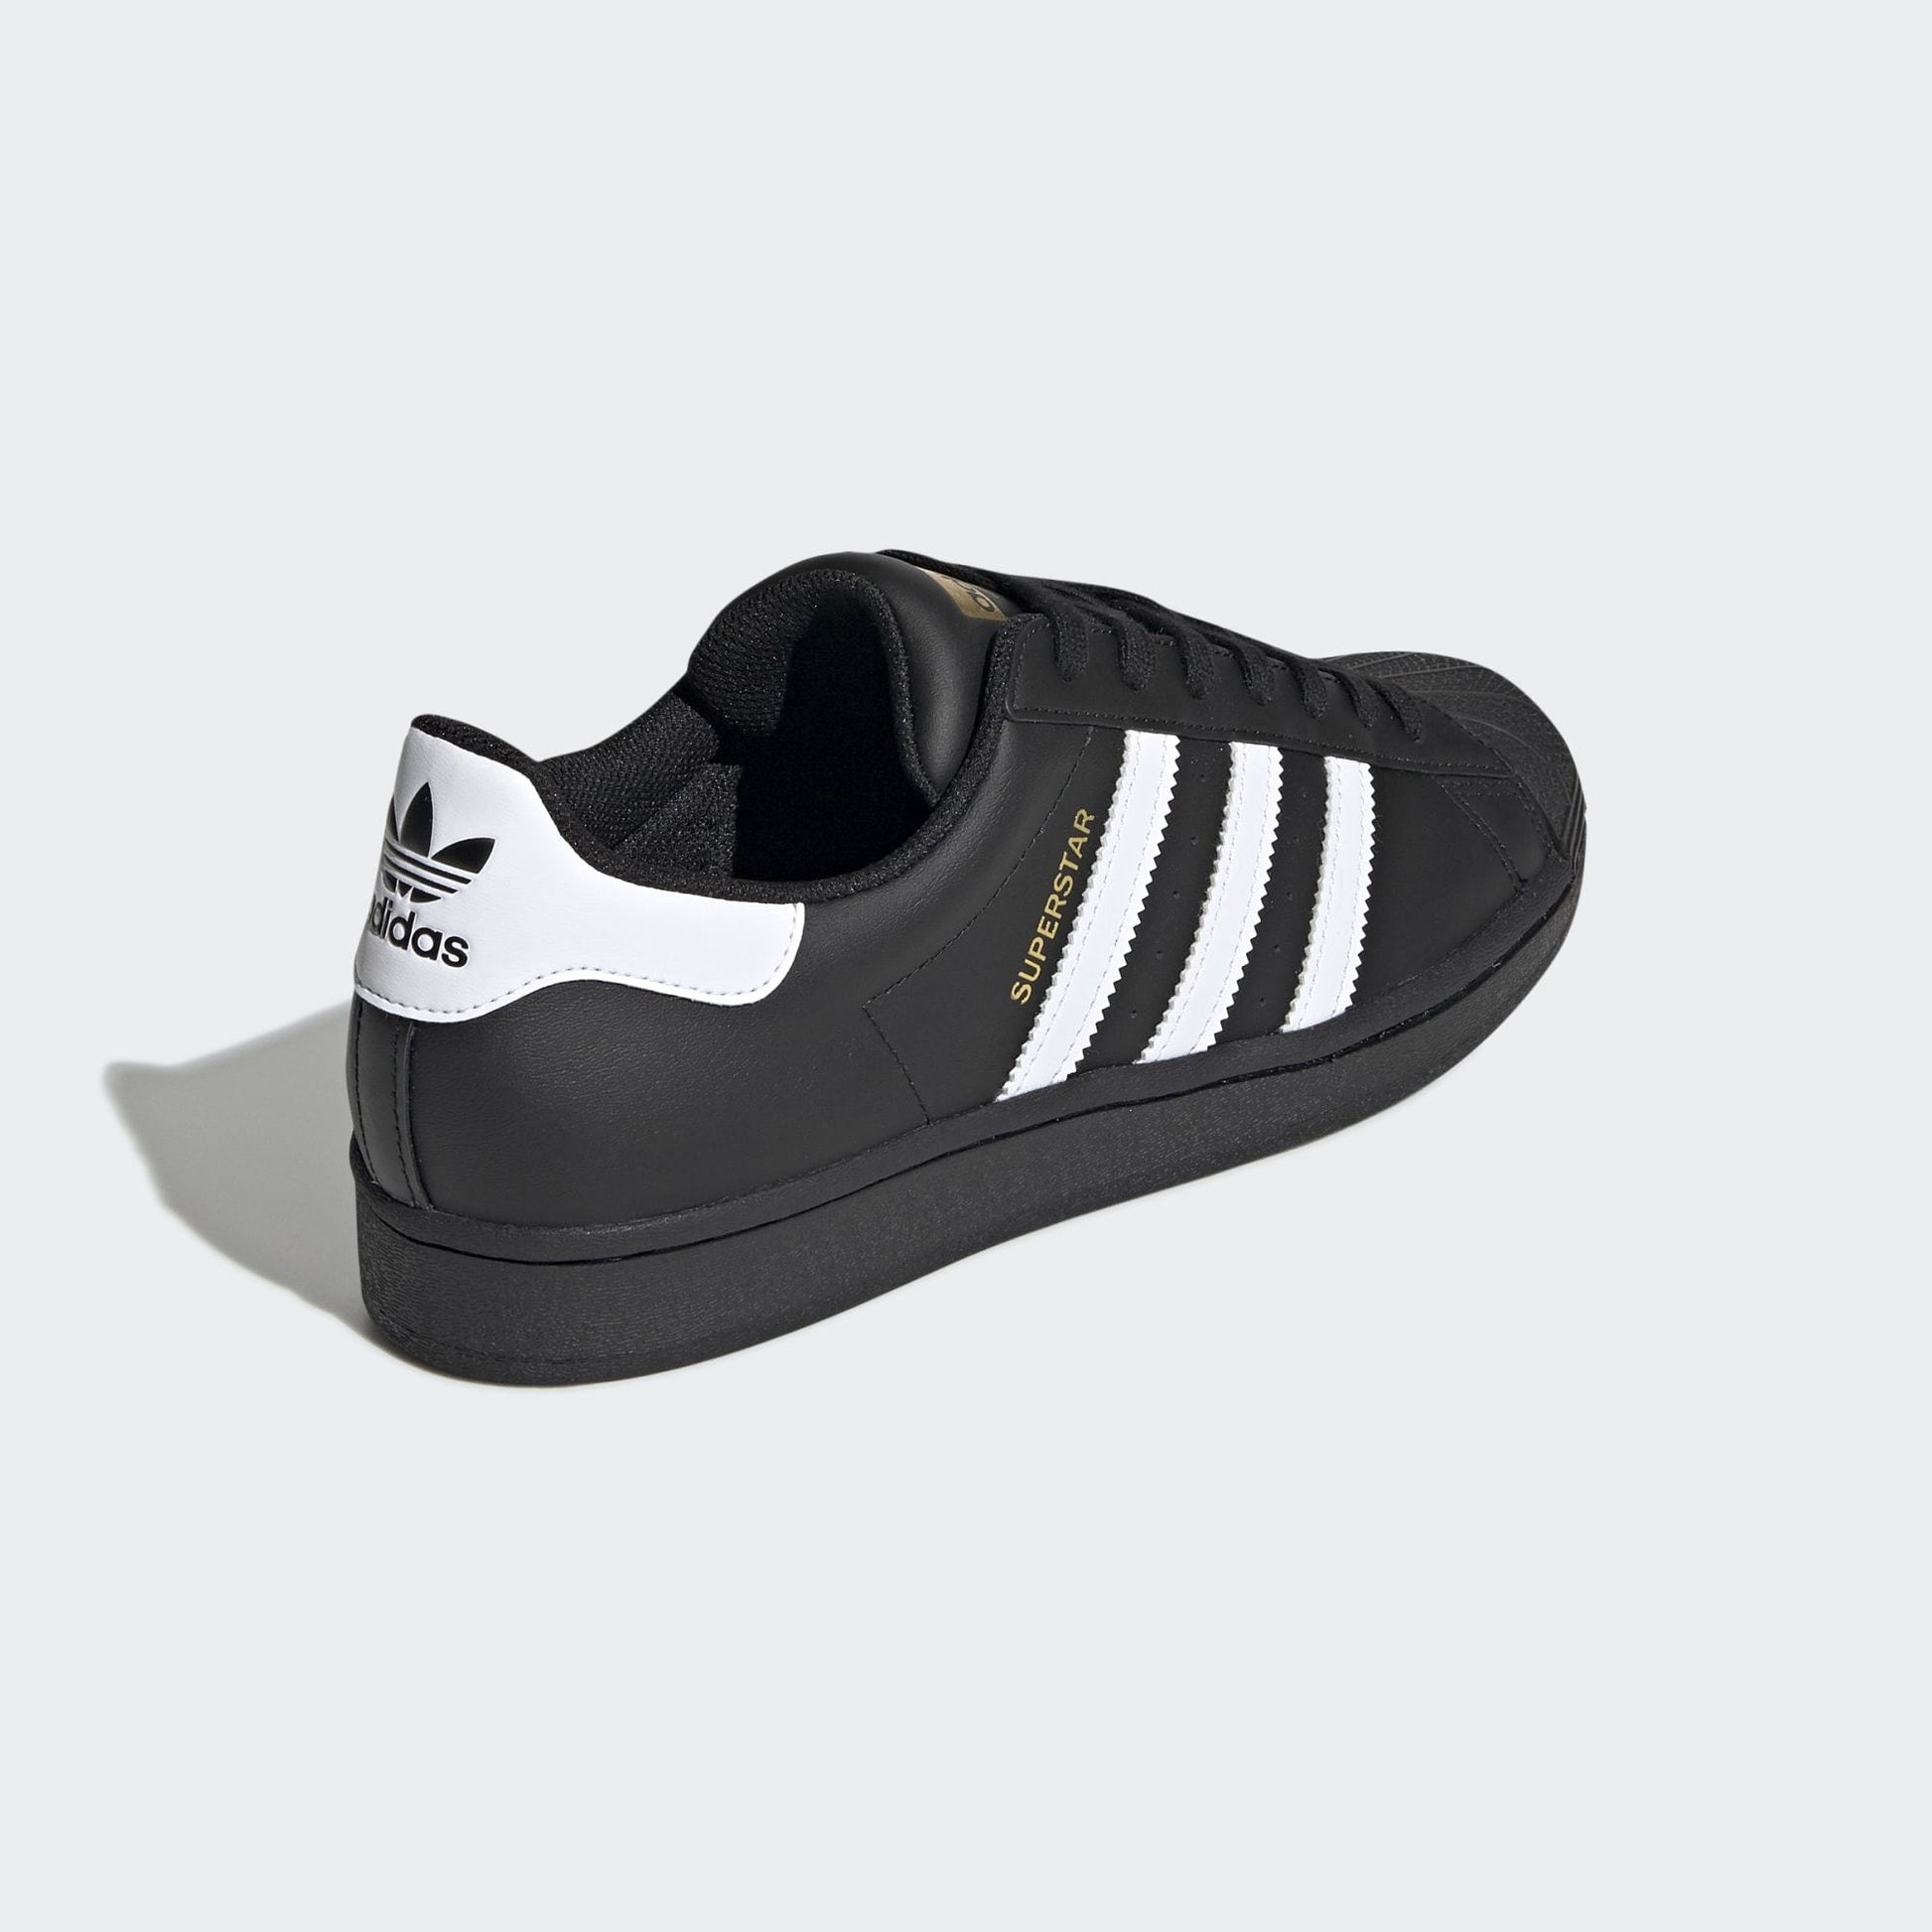 SUPERSTAR SHOES - Discount Store